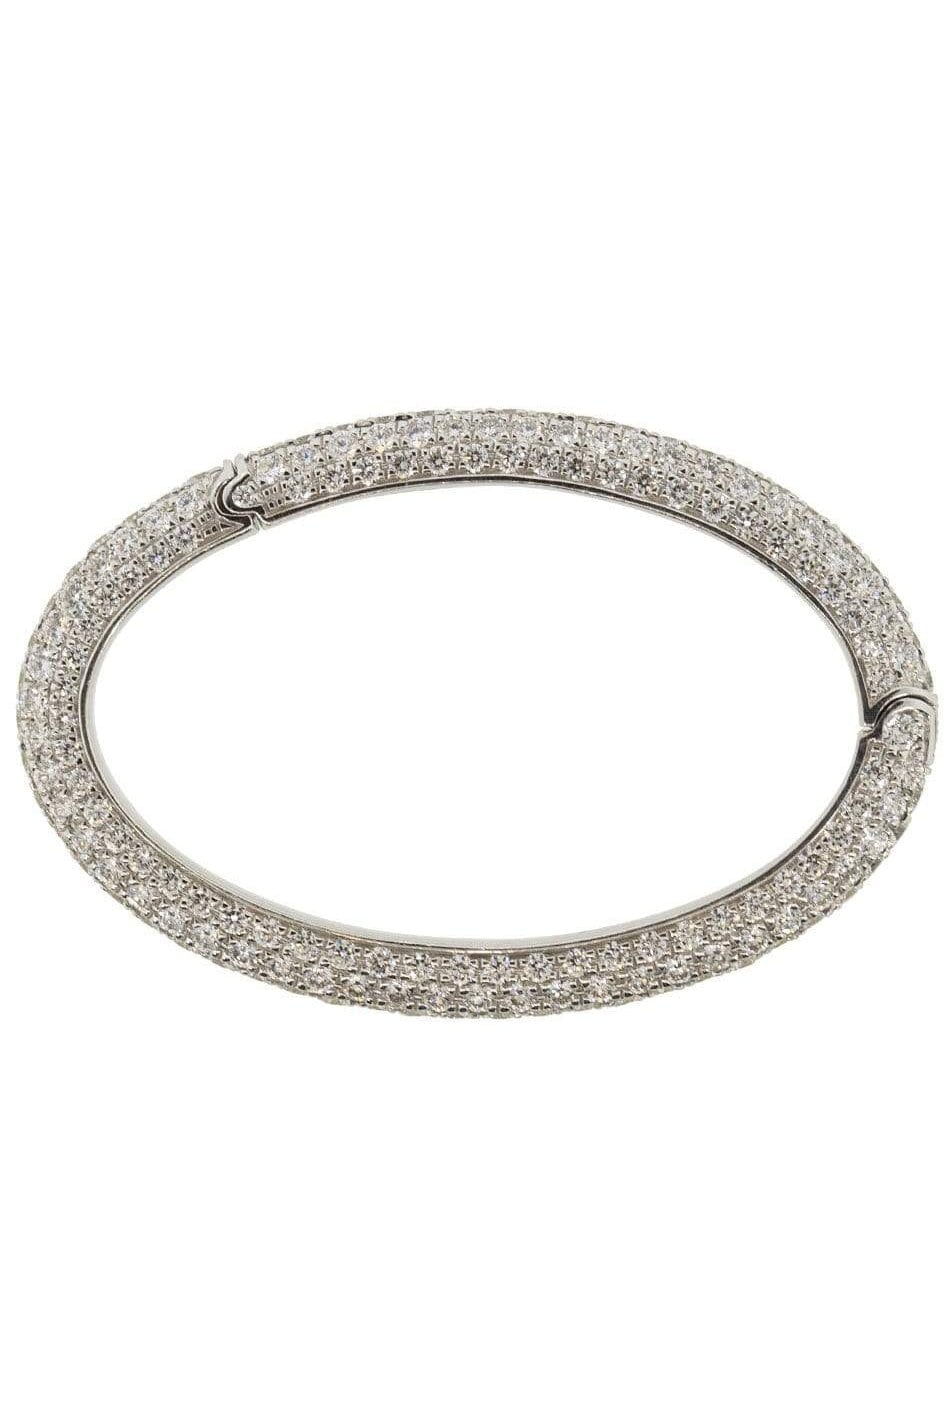 SIDNEY GARBER-Large White Diamond Oval Link Clasp-WHITE GOLD